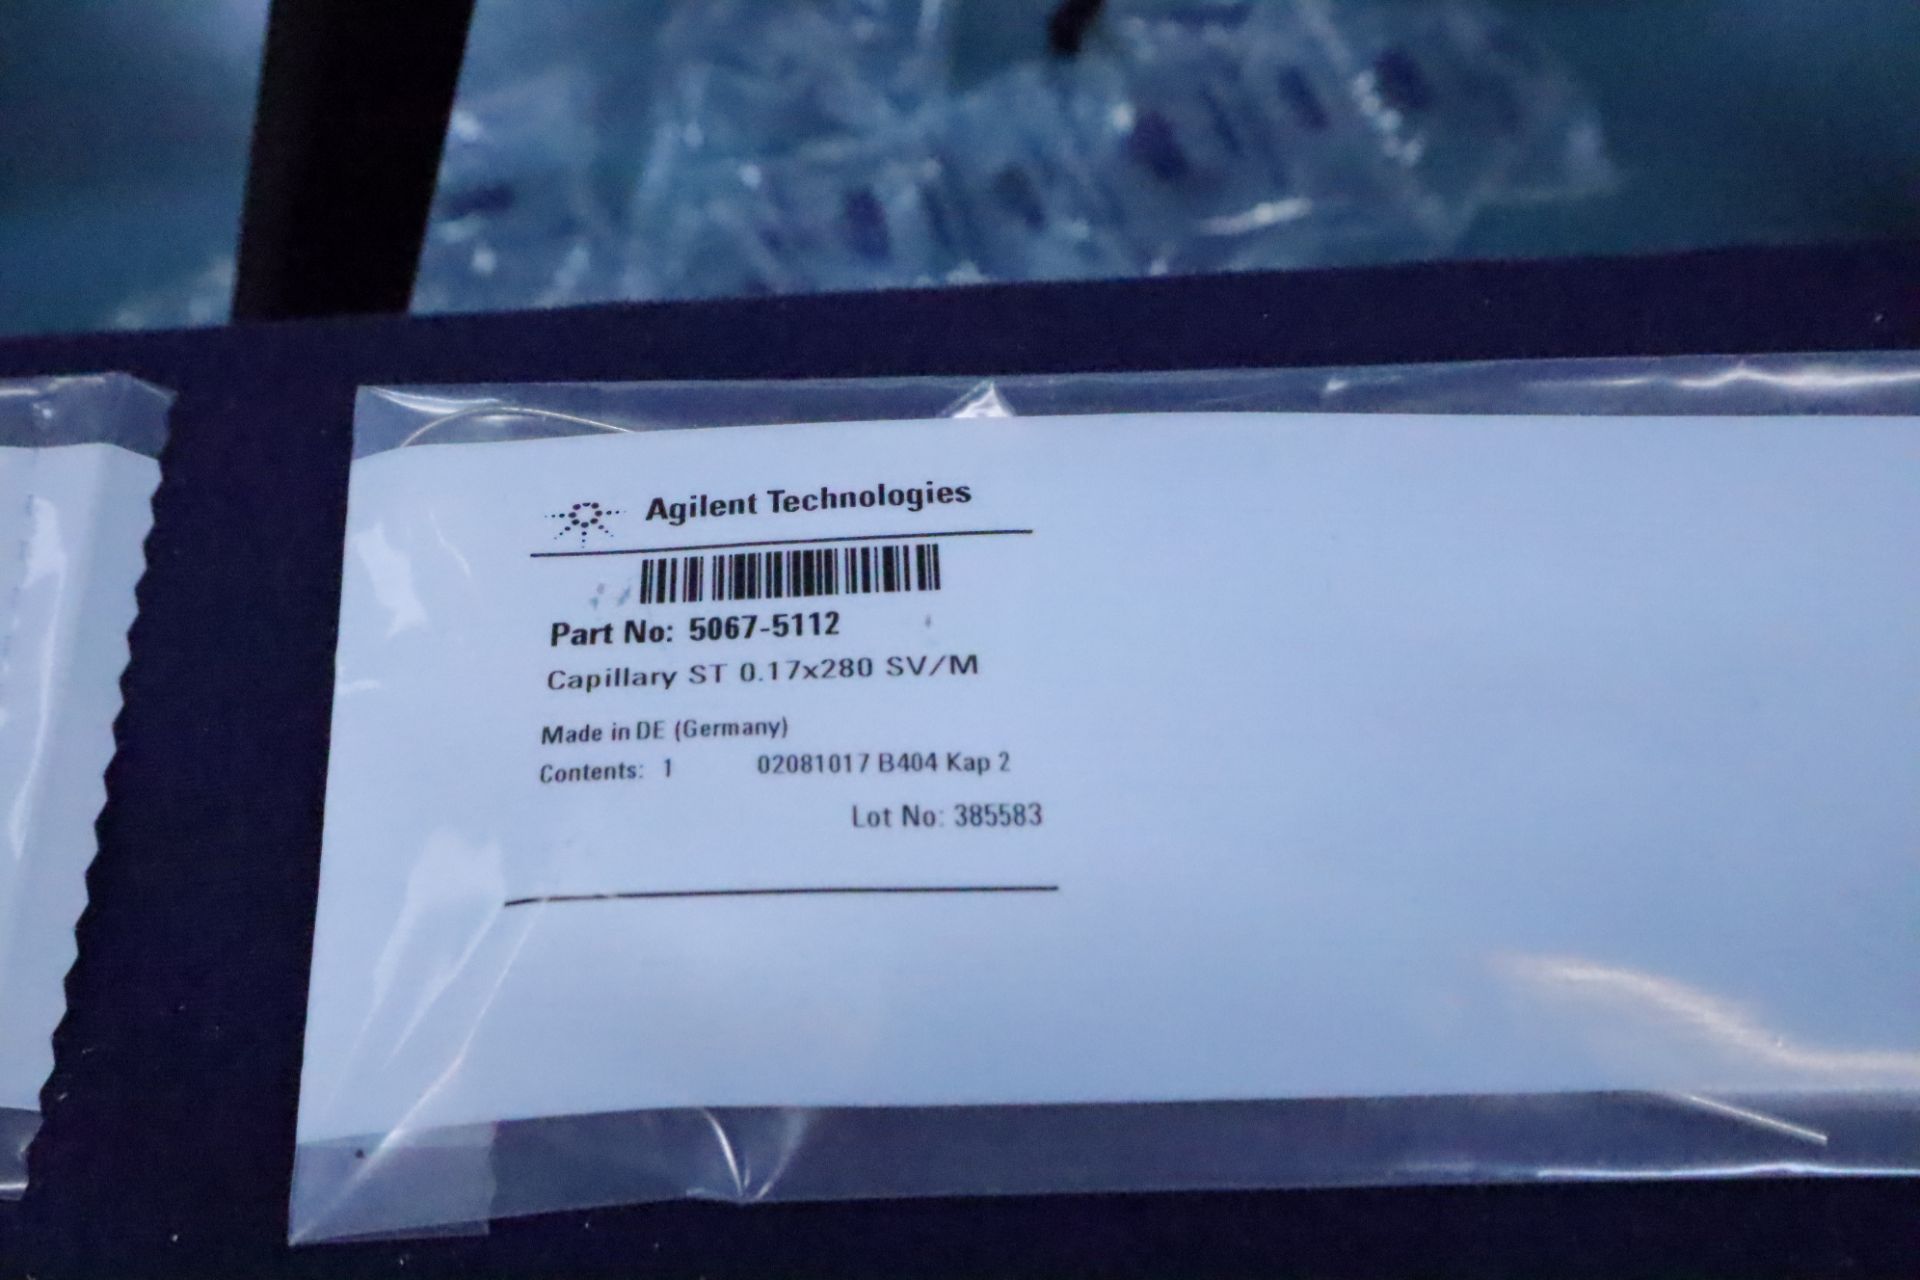 (NIB) Agilent Technologies OEM Replacement Parts for LC/MS Machines - Image 4 of 28